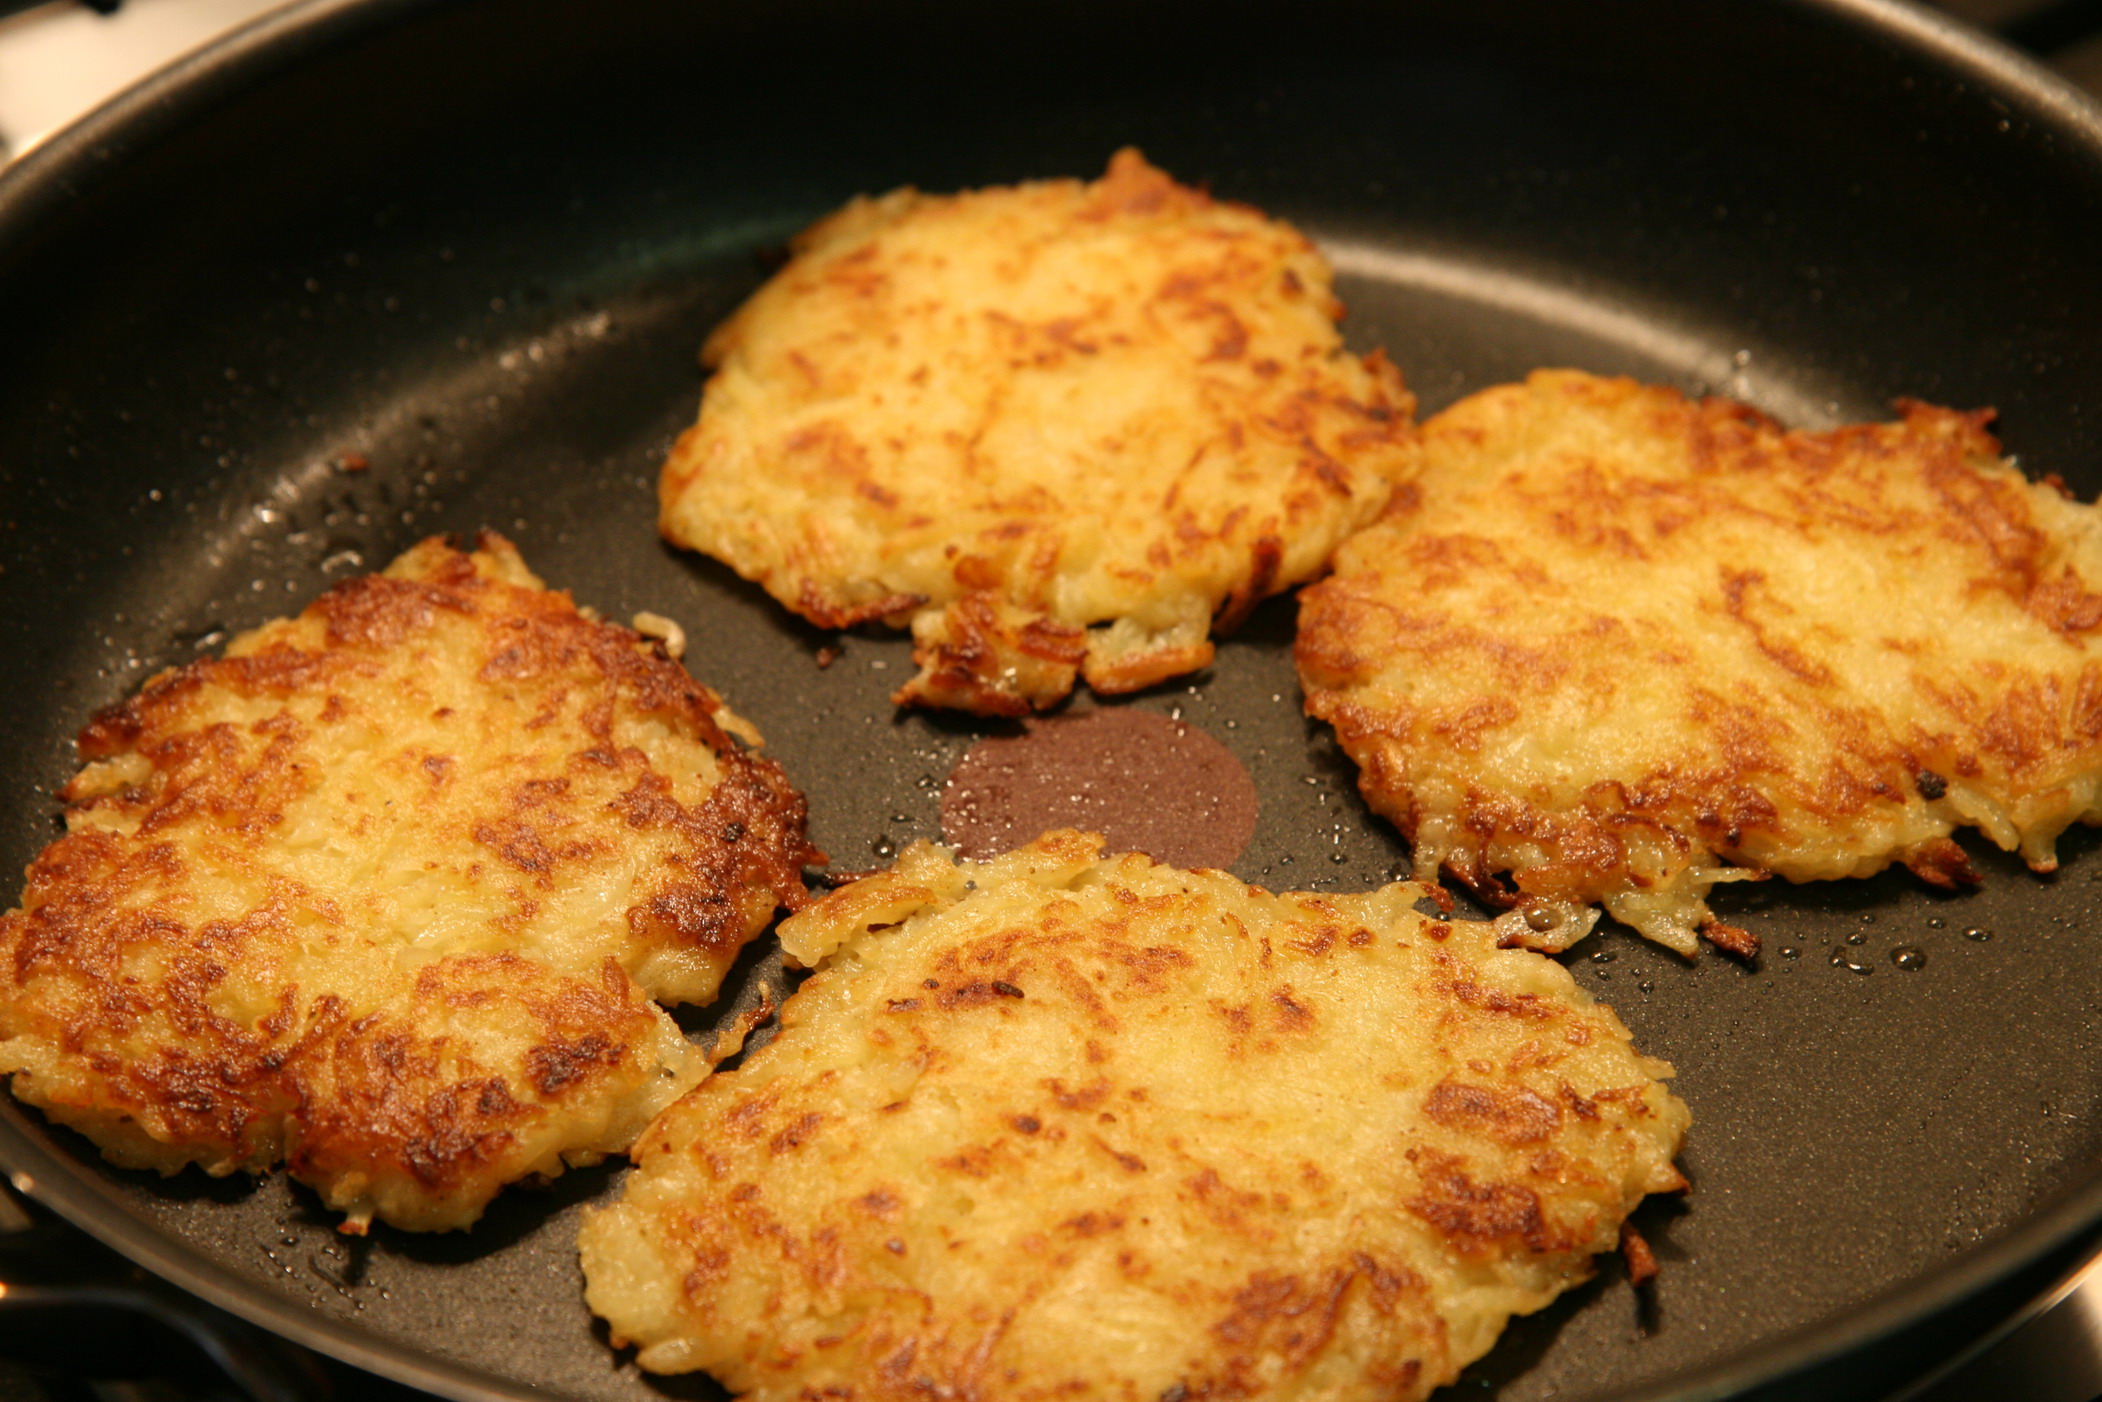 the pan is filled with four fried cakes